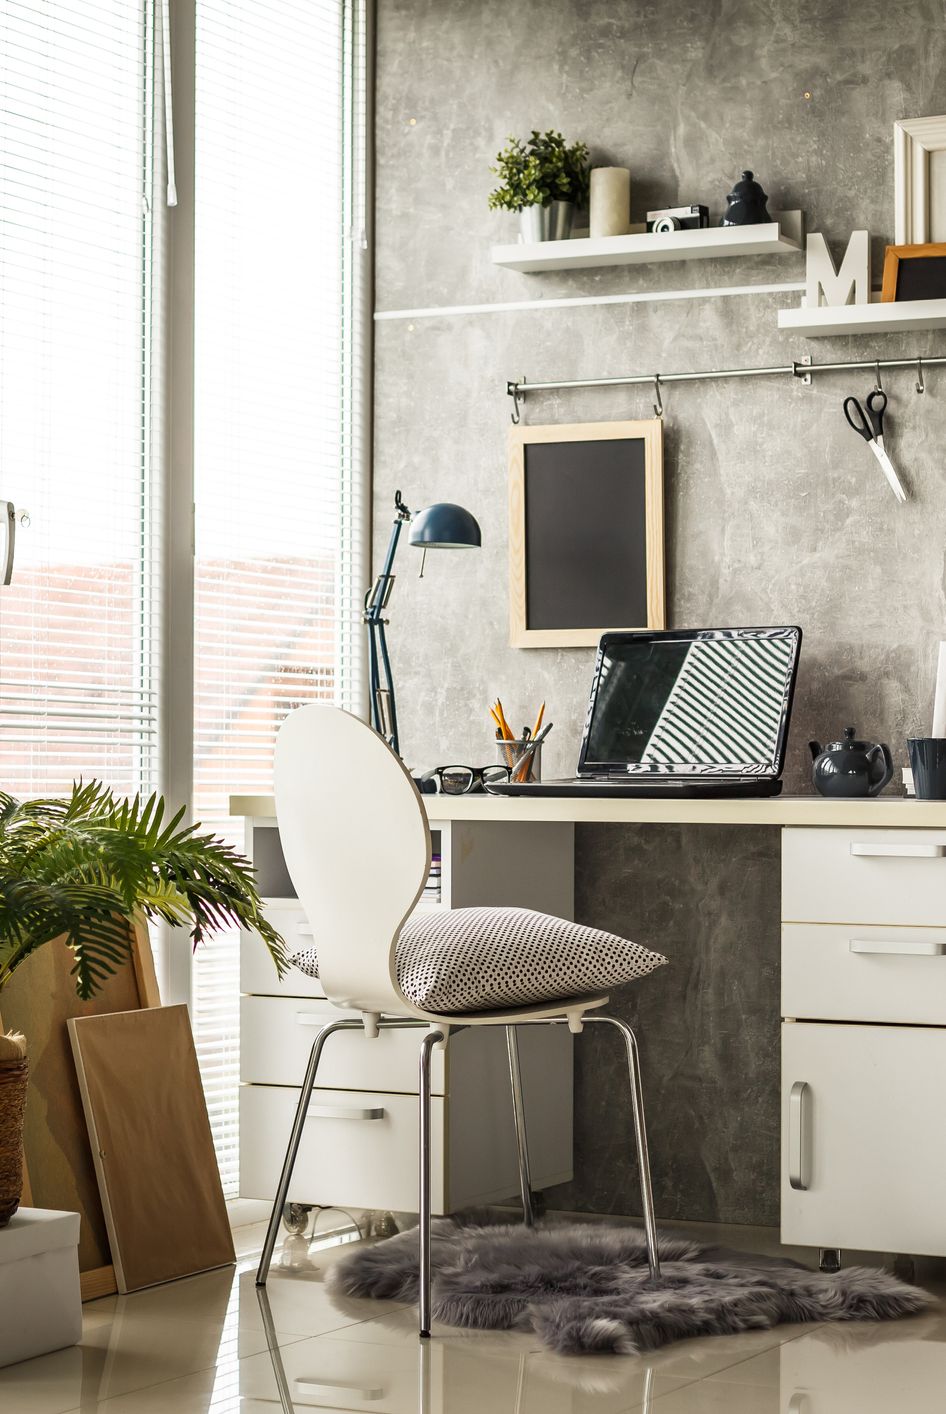 7 Useful Home office deco tricks you need to try in 2021 - Daily Dream Decor